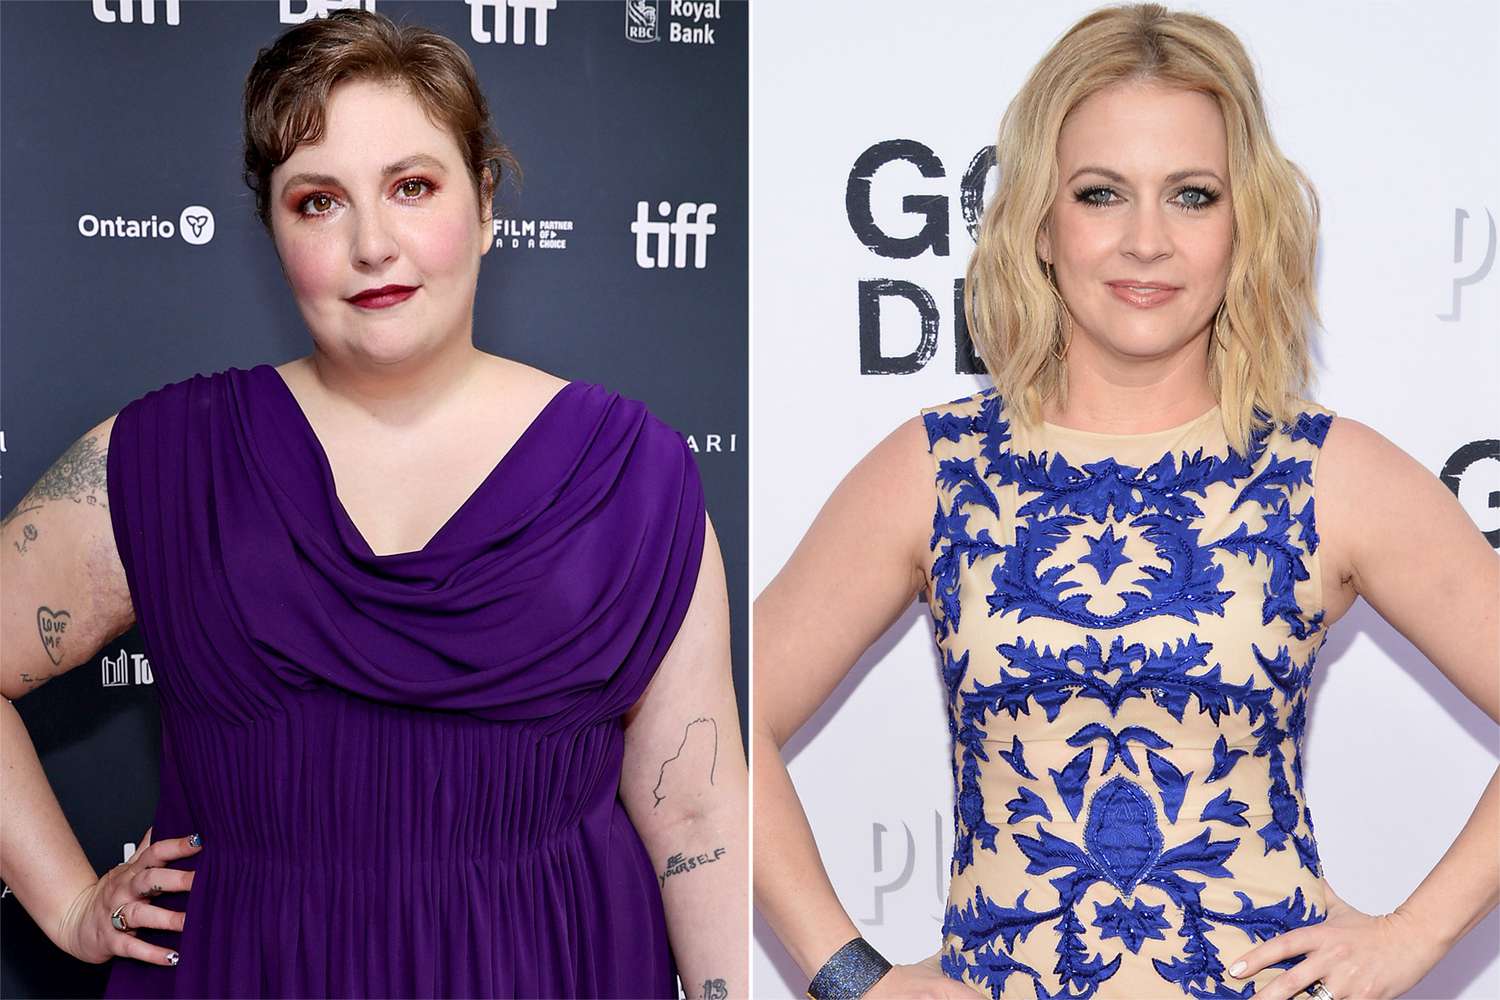 Lena Dunham didn't know she was in feud with Melissa Joan Hart: 'I've never met Melissa Joan Hart'